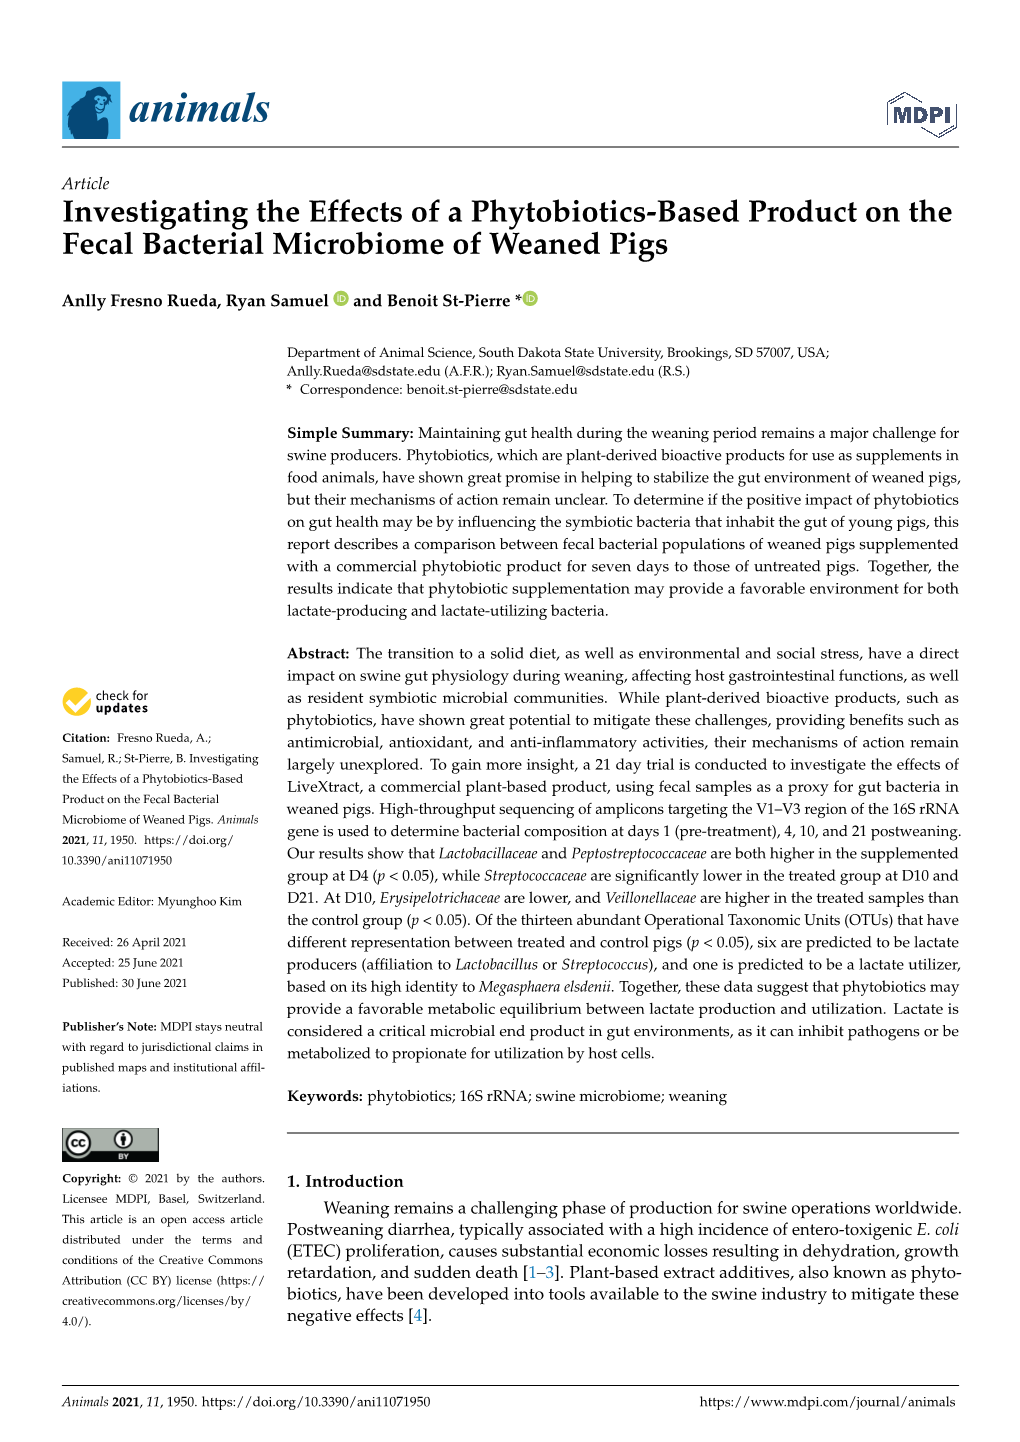 Investigating the Effects of a Phytobiotics-Based Product on the Fecal Bacterial Microbiome of Weaned Pigs